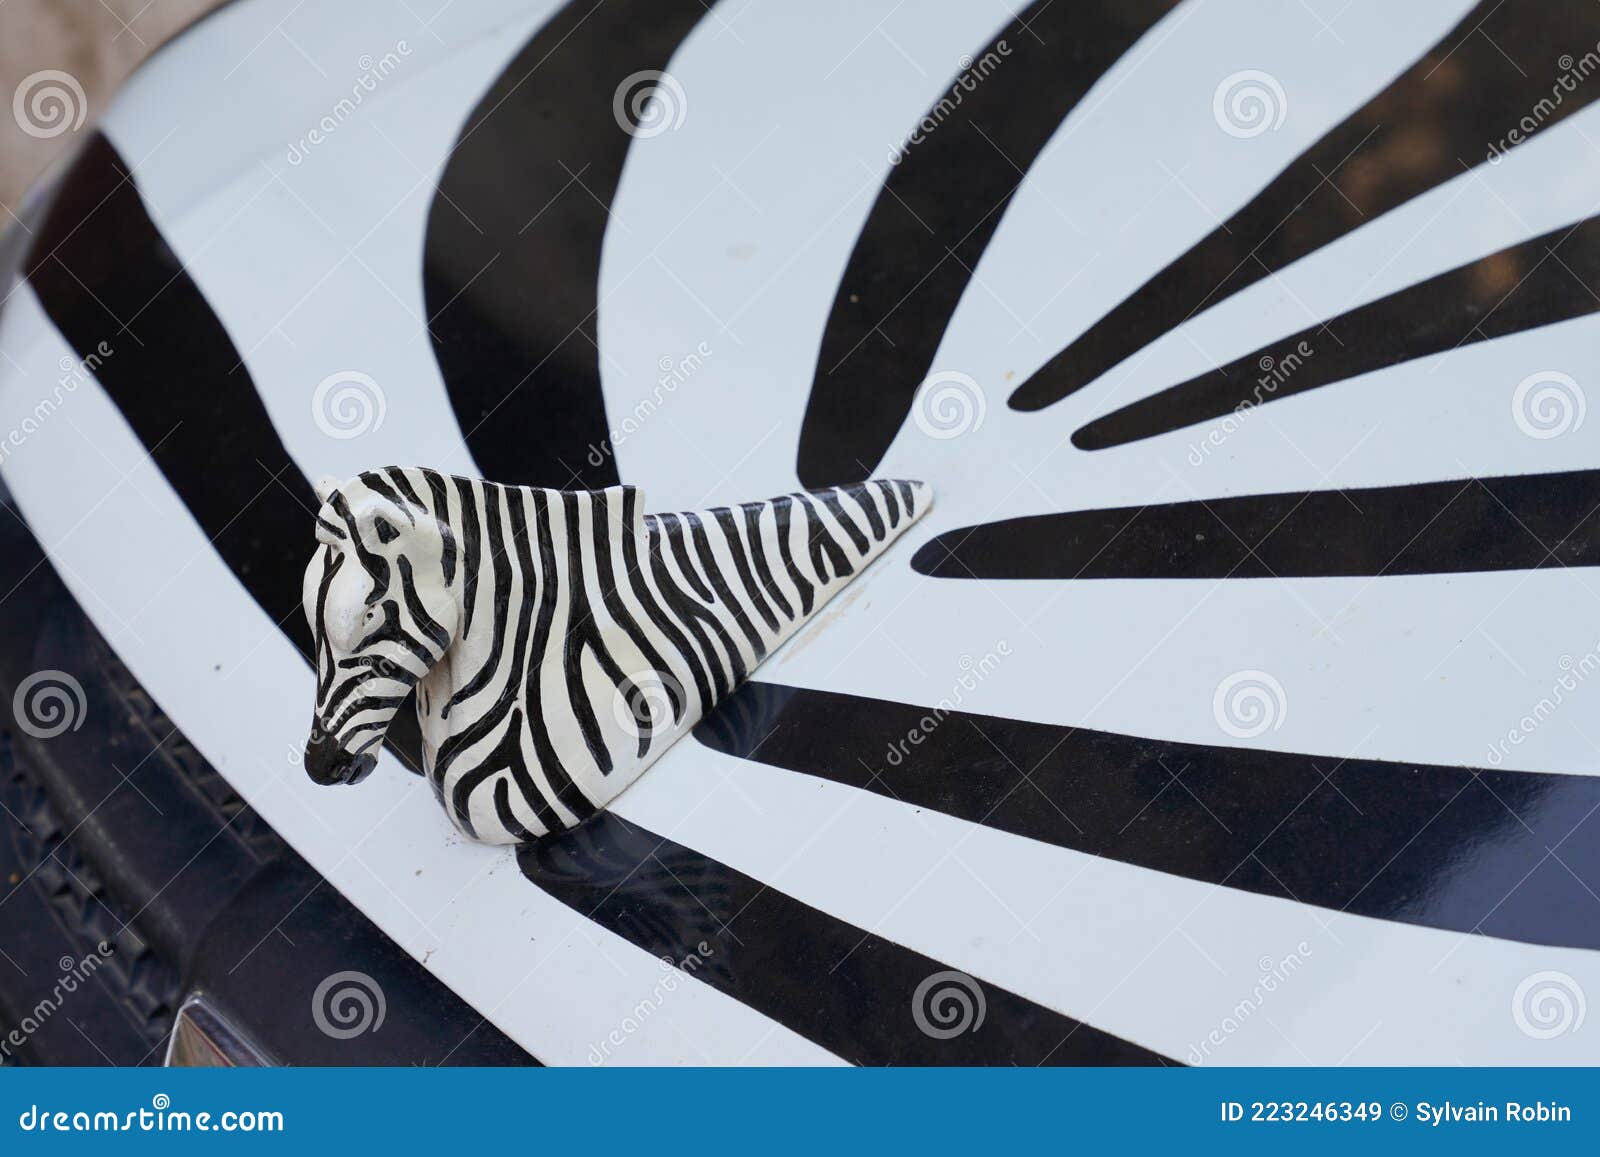 Dacia Car Repainted in Zebra and Covering Stickers with Artificial Skin and Animal  Head Editorial Stock Image - Image of covering, automotive: 223246349